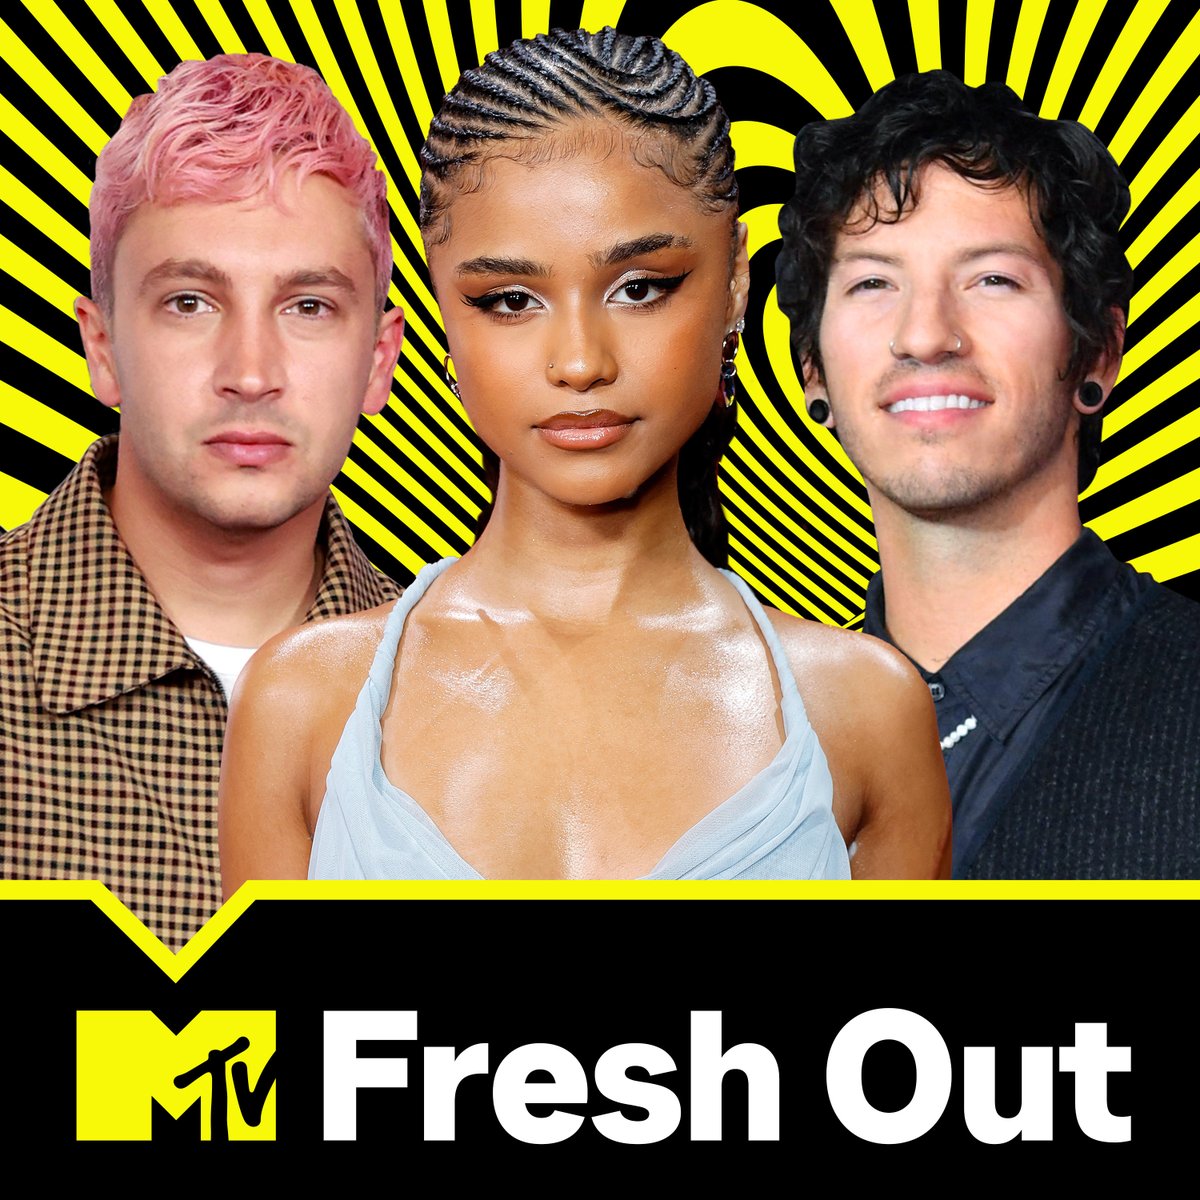 My plans for this LONG weekend include listening to all my favorite artists including: @Tyllaaaaaaa, @twentyonepilots + more on my #MTVFreshOut playlist 💿 Spotify: open.spotify.com/playlist/6Vayw……Apple Music: music.apple.com/us/playlist/mt…